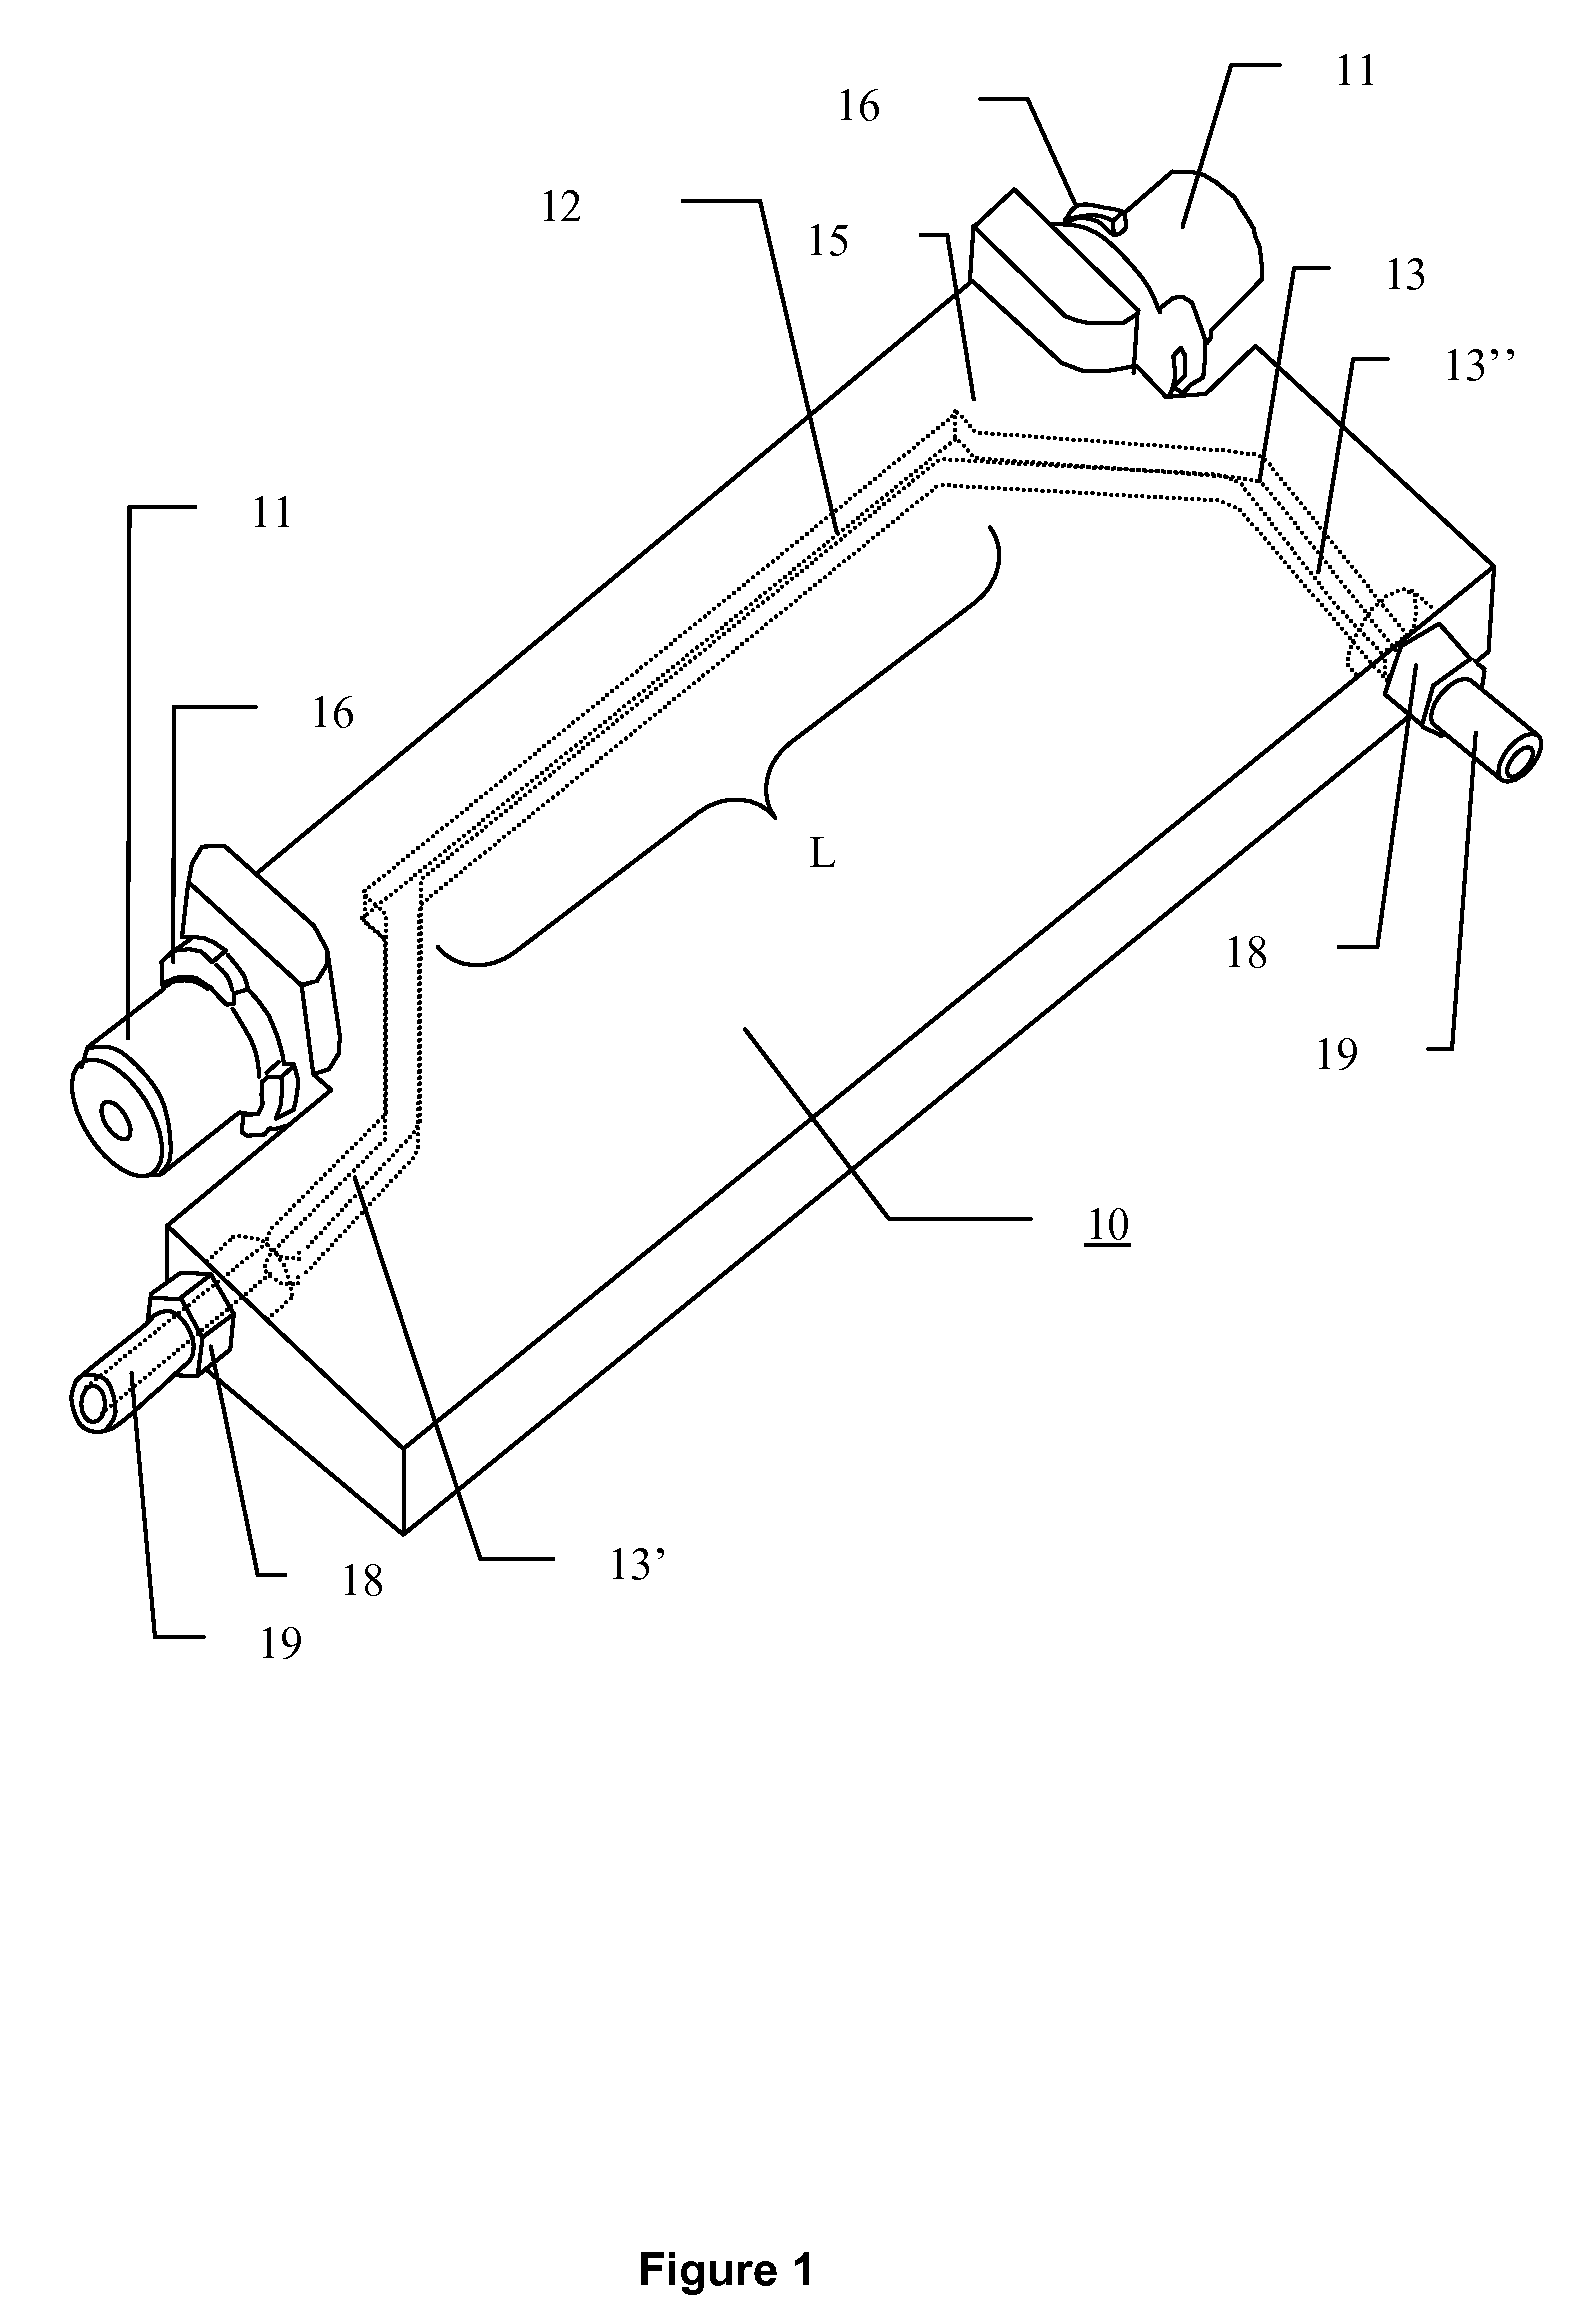 Flow cell for measuring flow rate of a fluid using ultrasonic waves